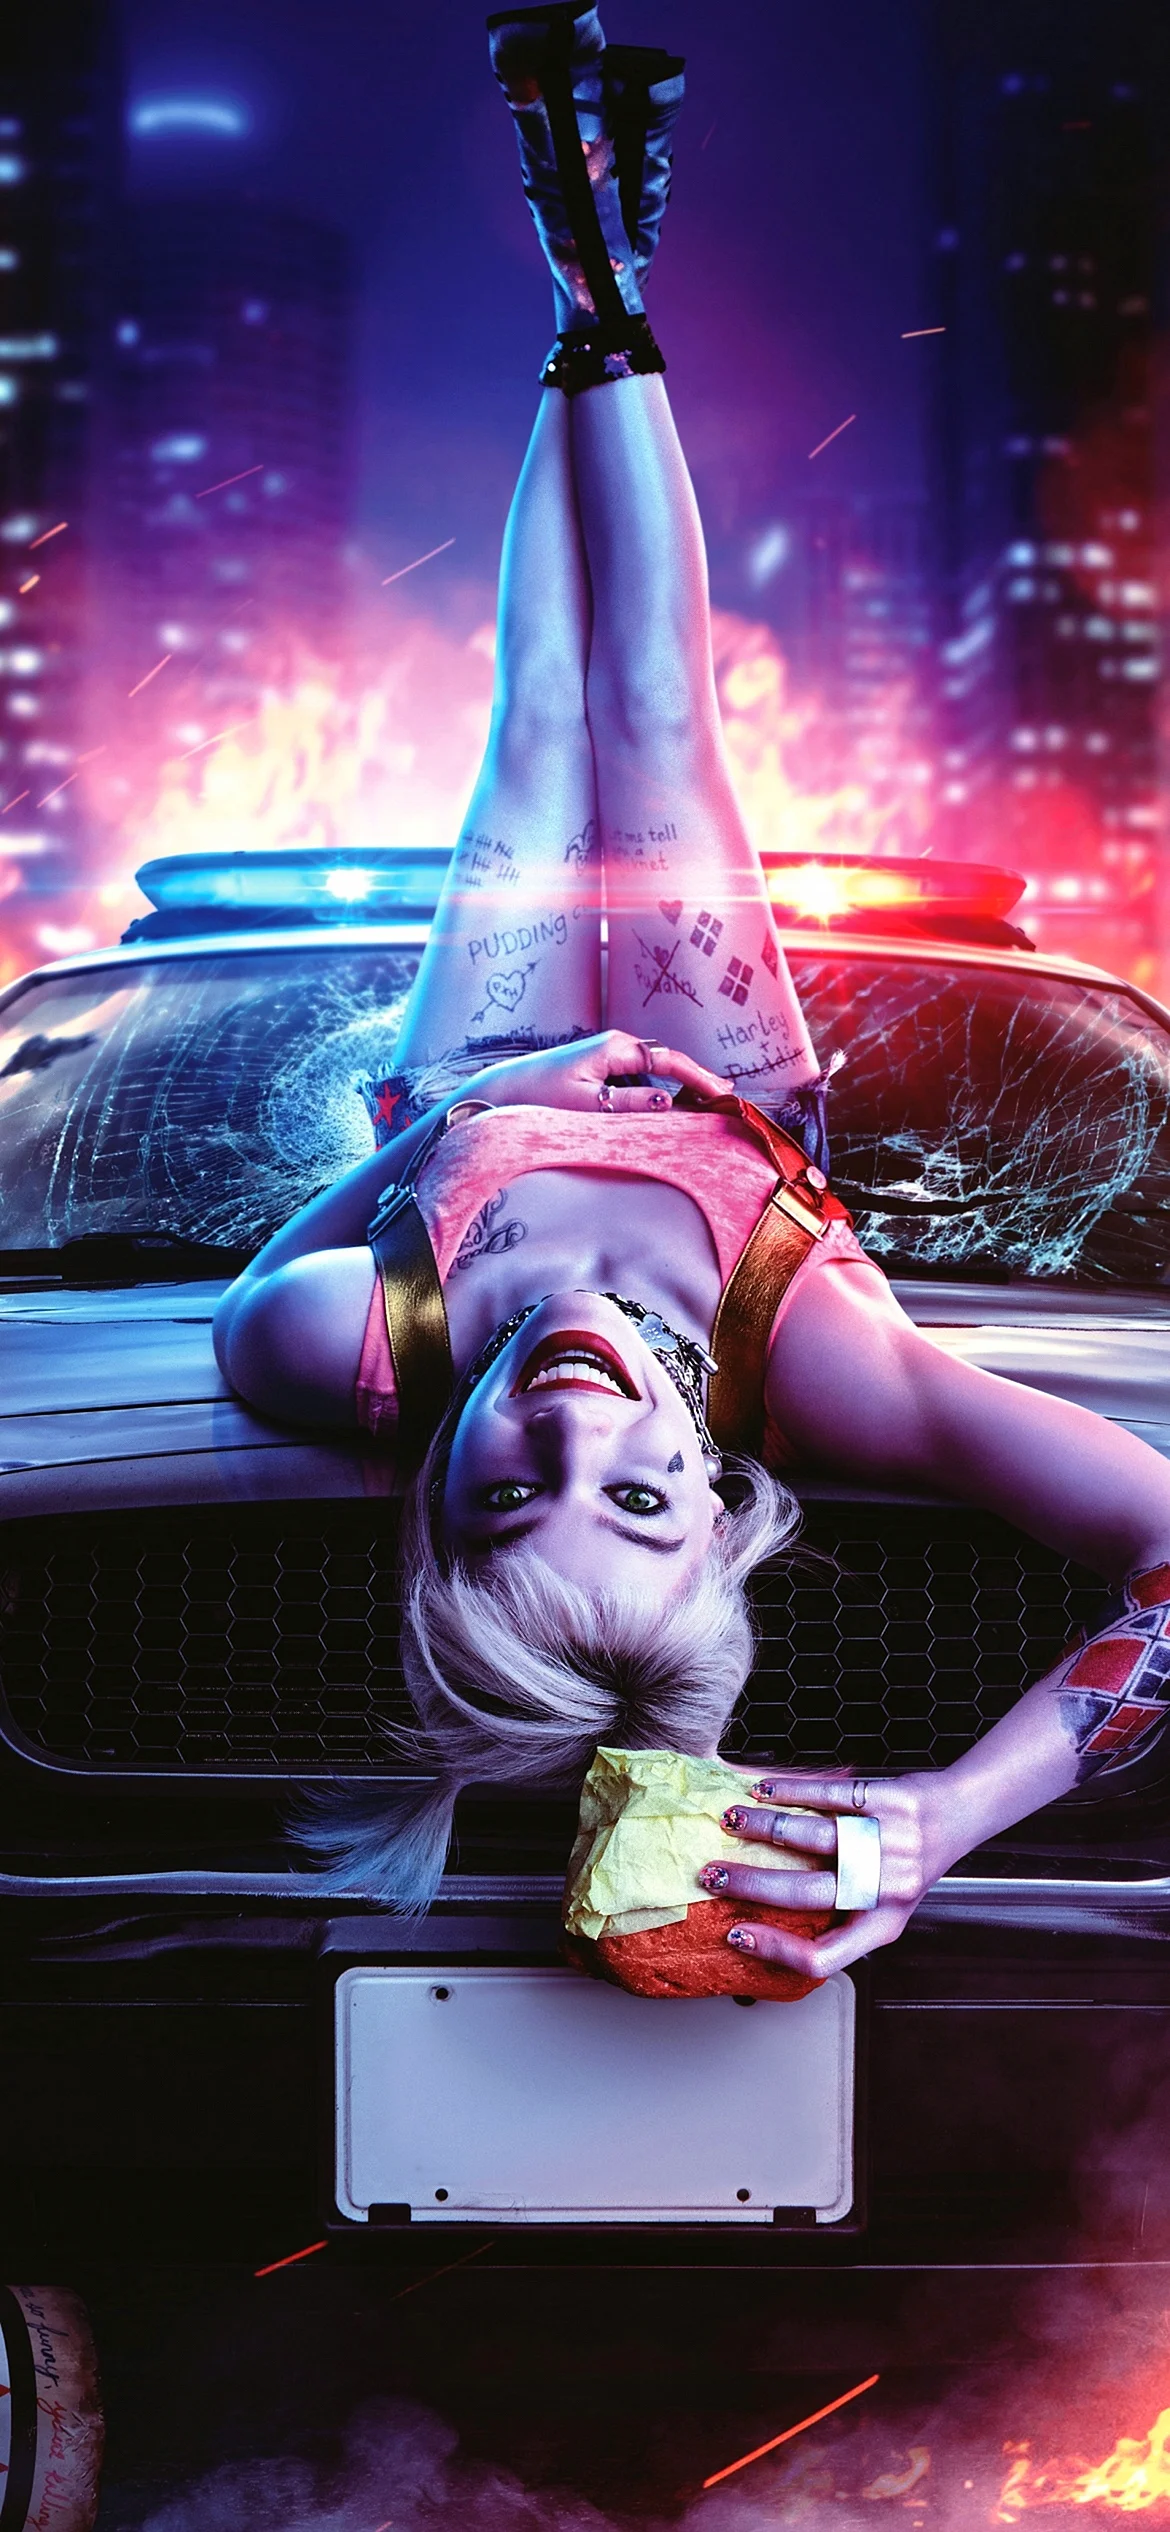 Harley Quinn Poster Wallpaper for iPhone 12 Pro